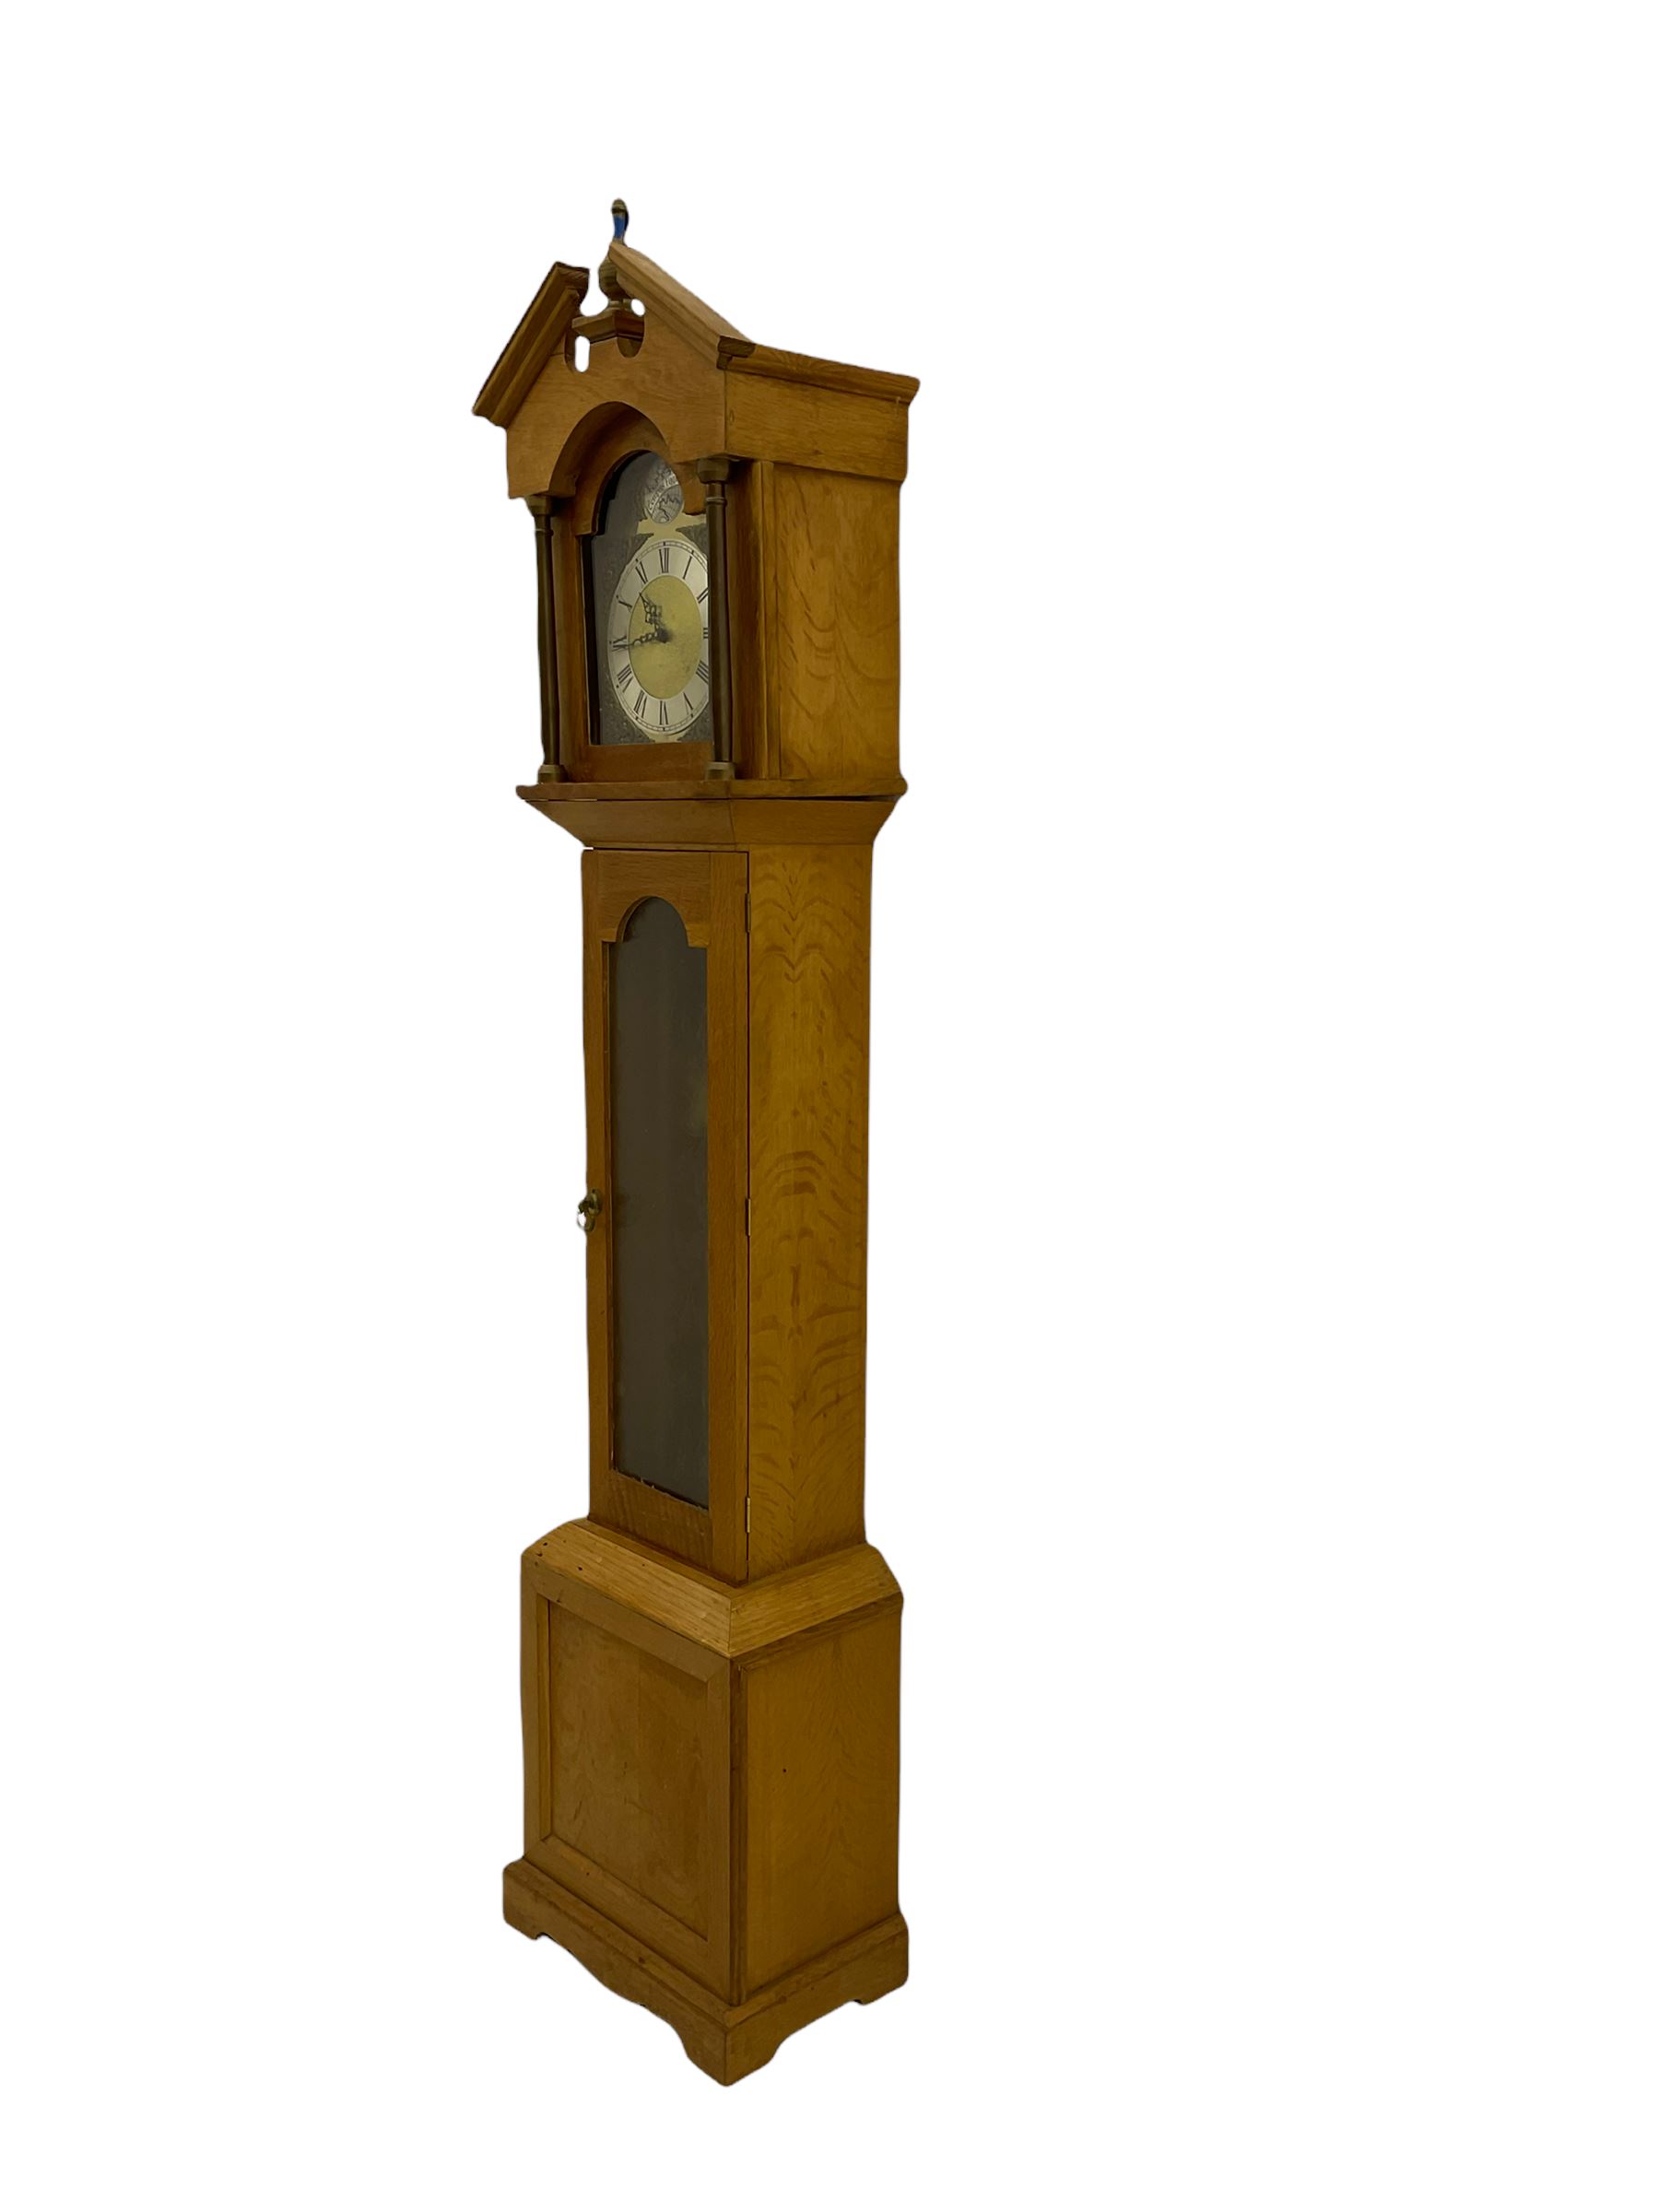 Chiming Grandmother clock - Image 3 of 4